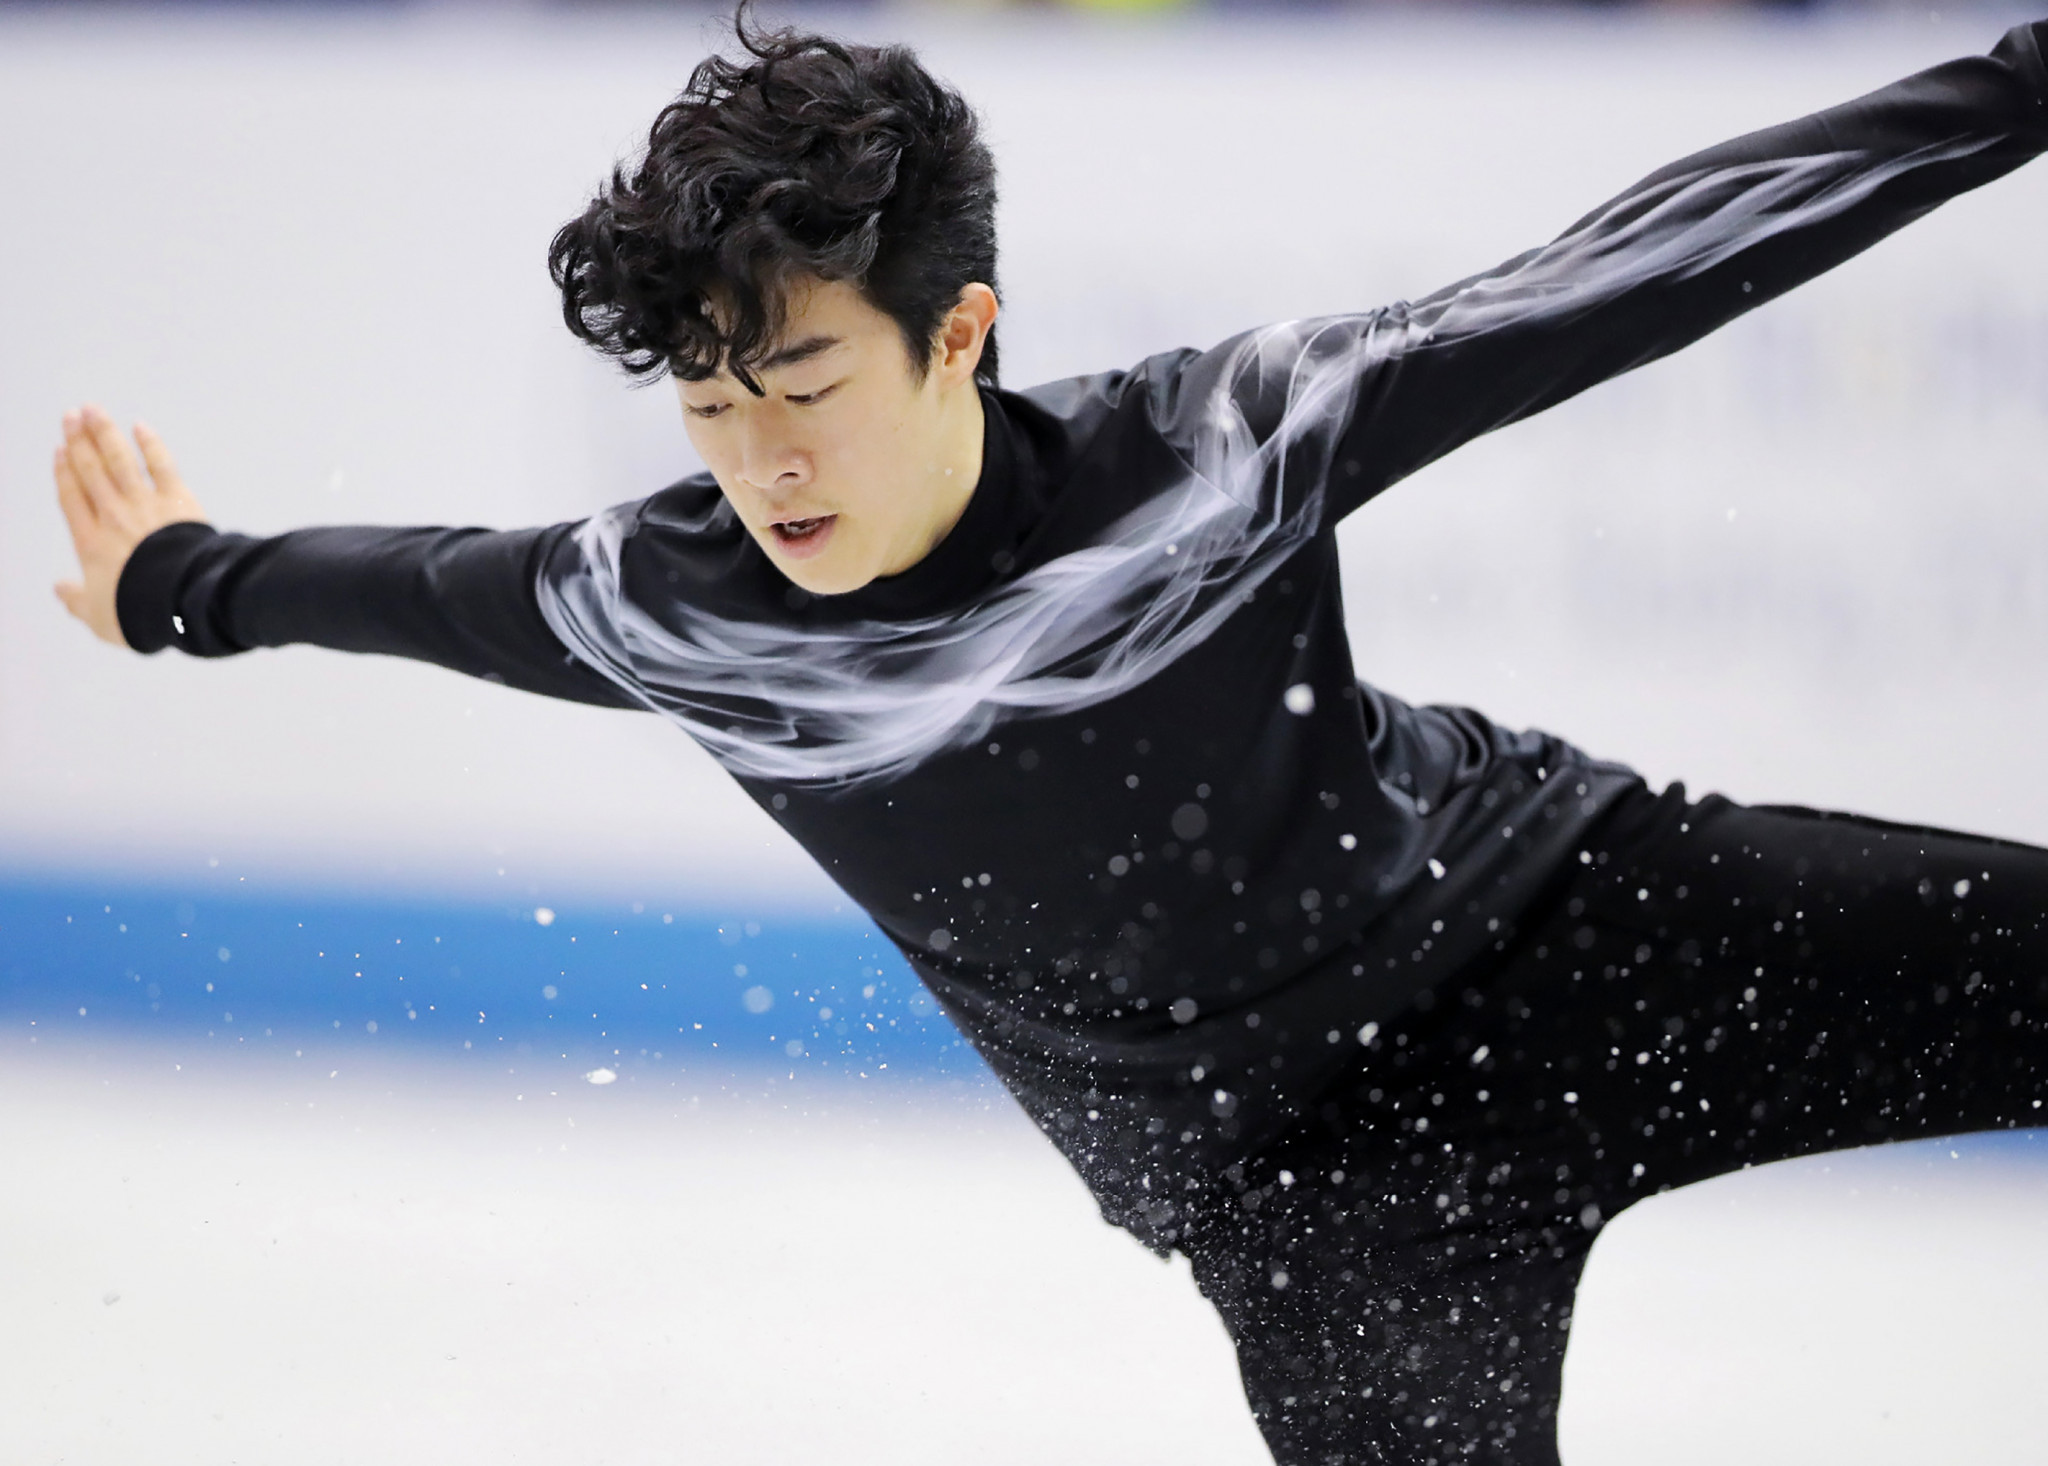 Chen on track for eighth successive Grand Prix title at International de France